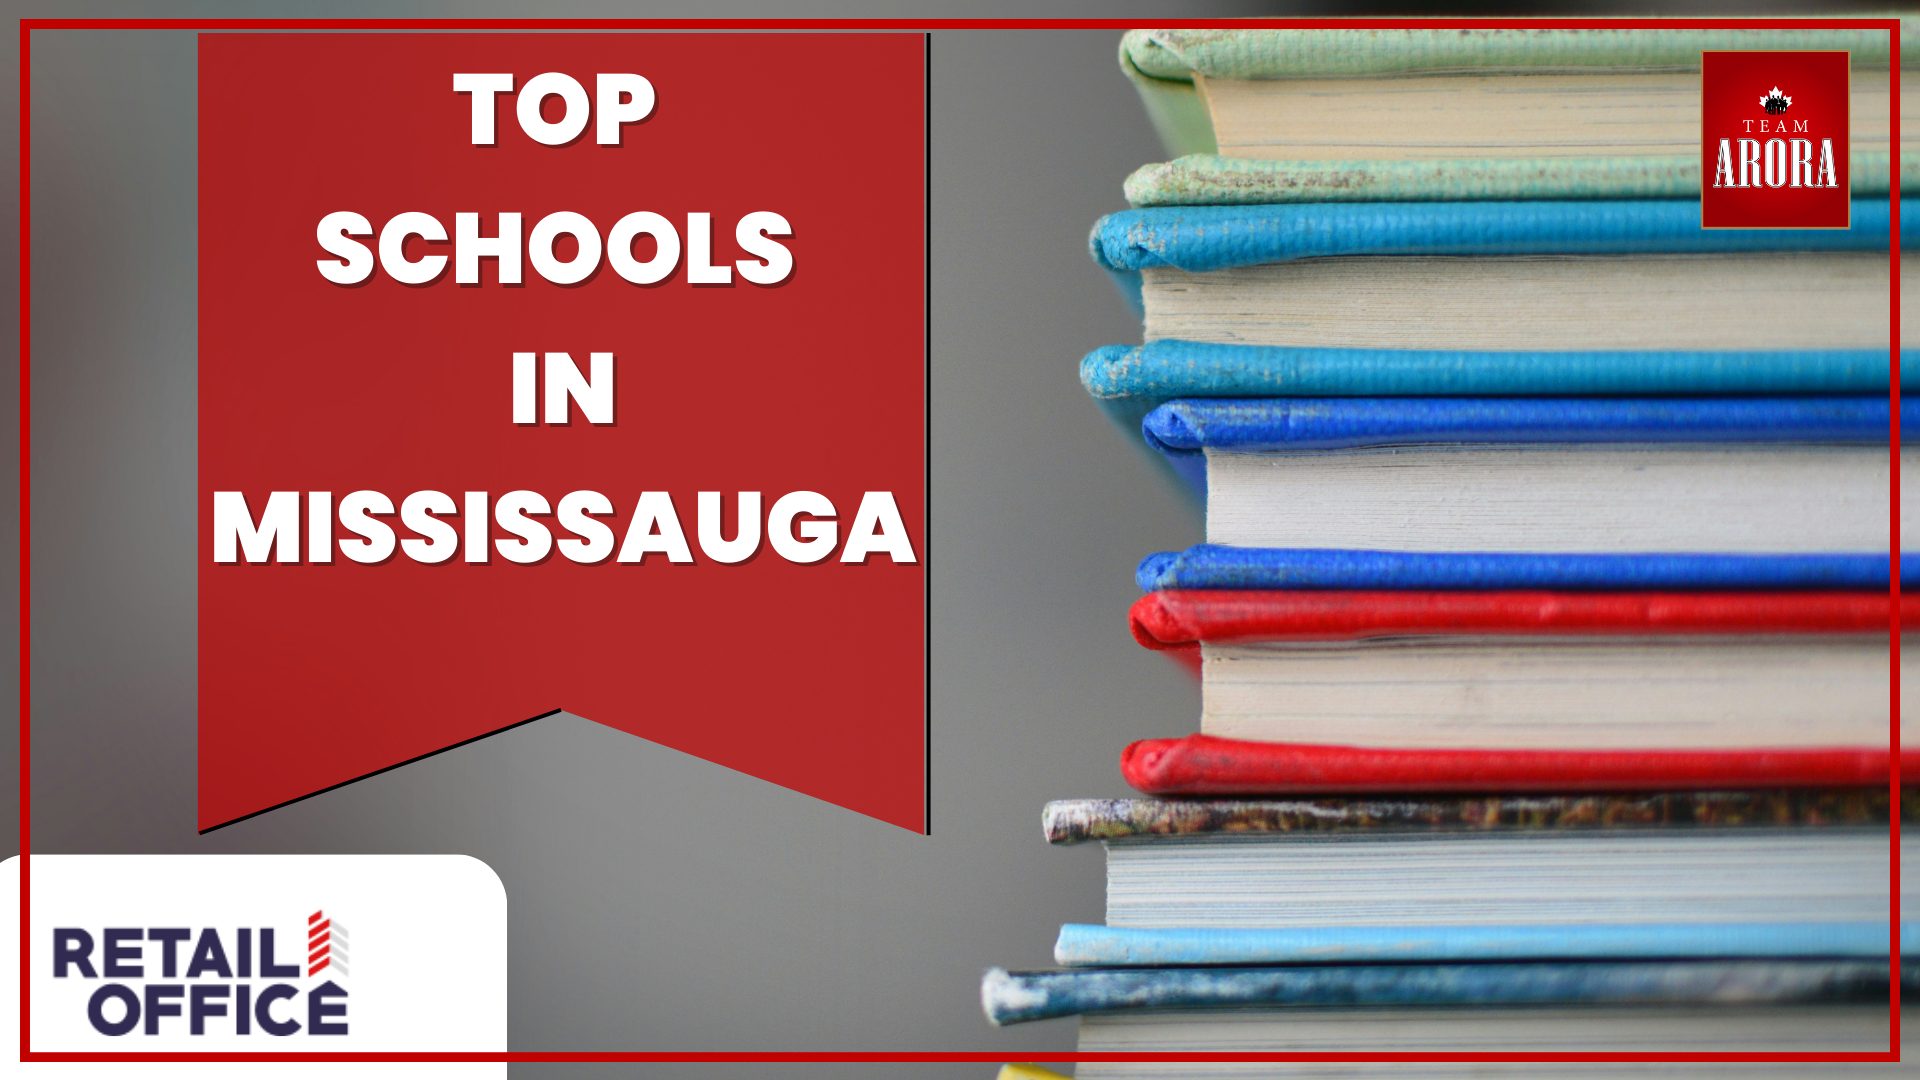 Top Schools in Mississauga